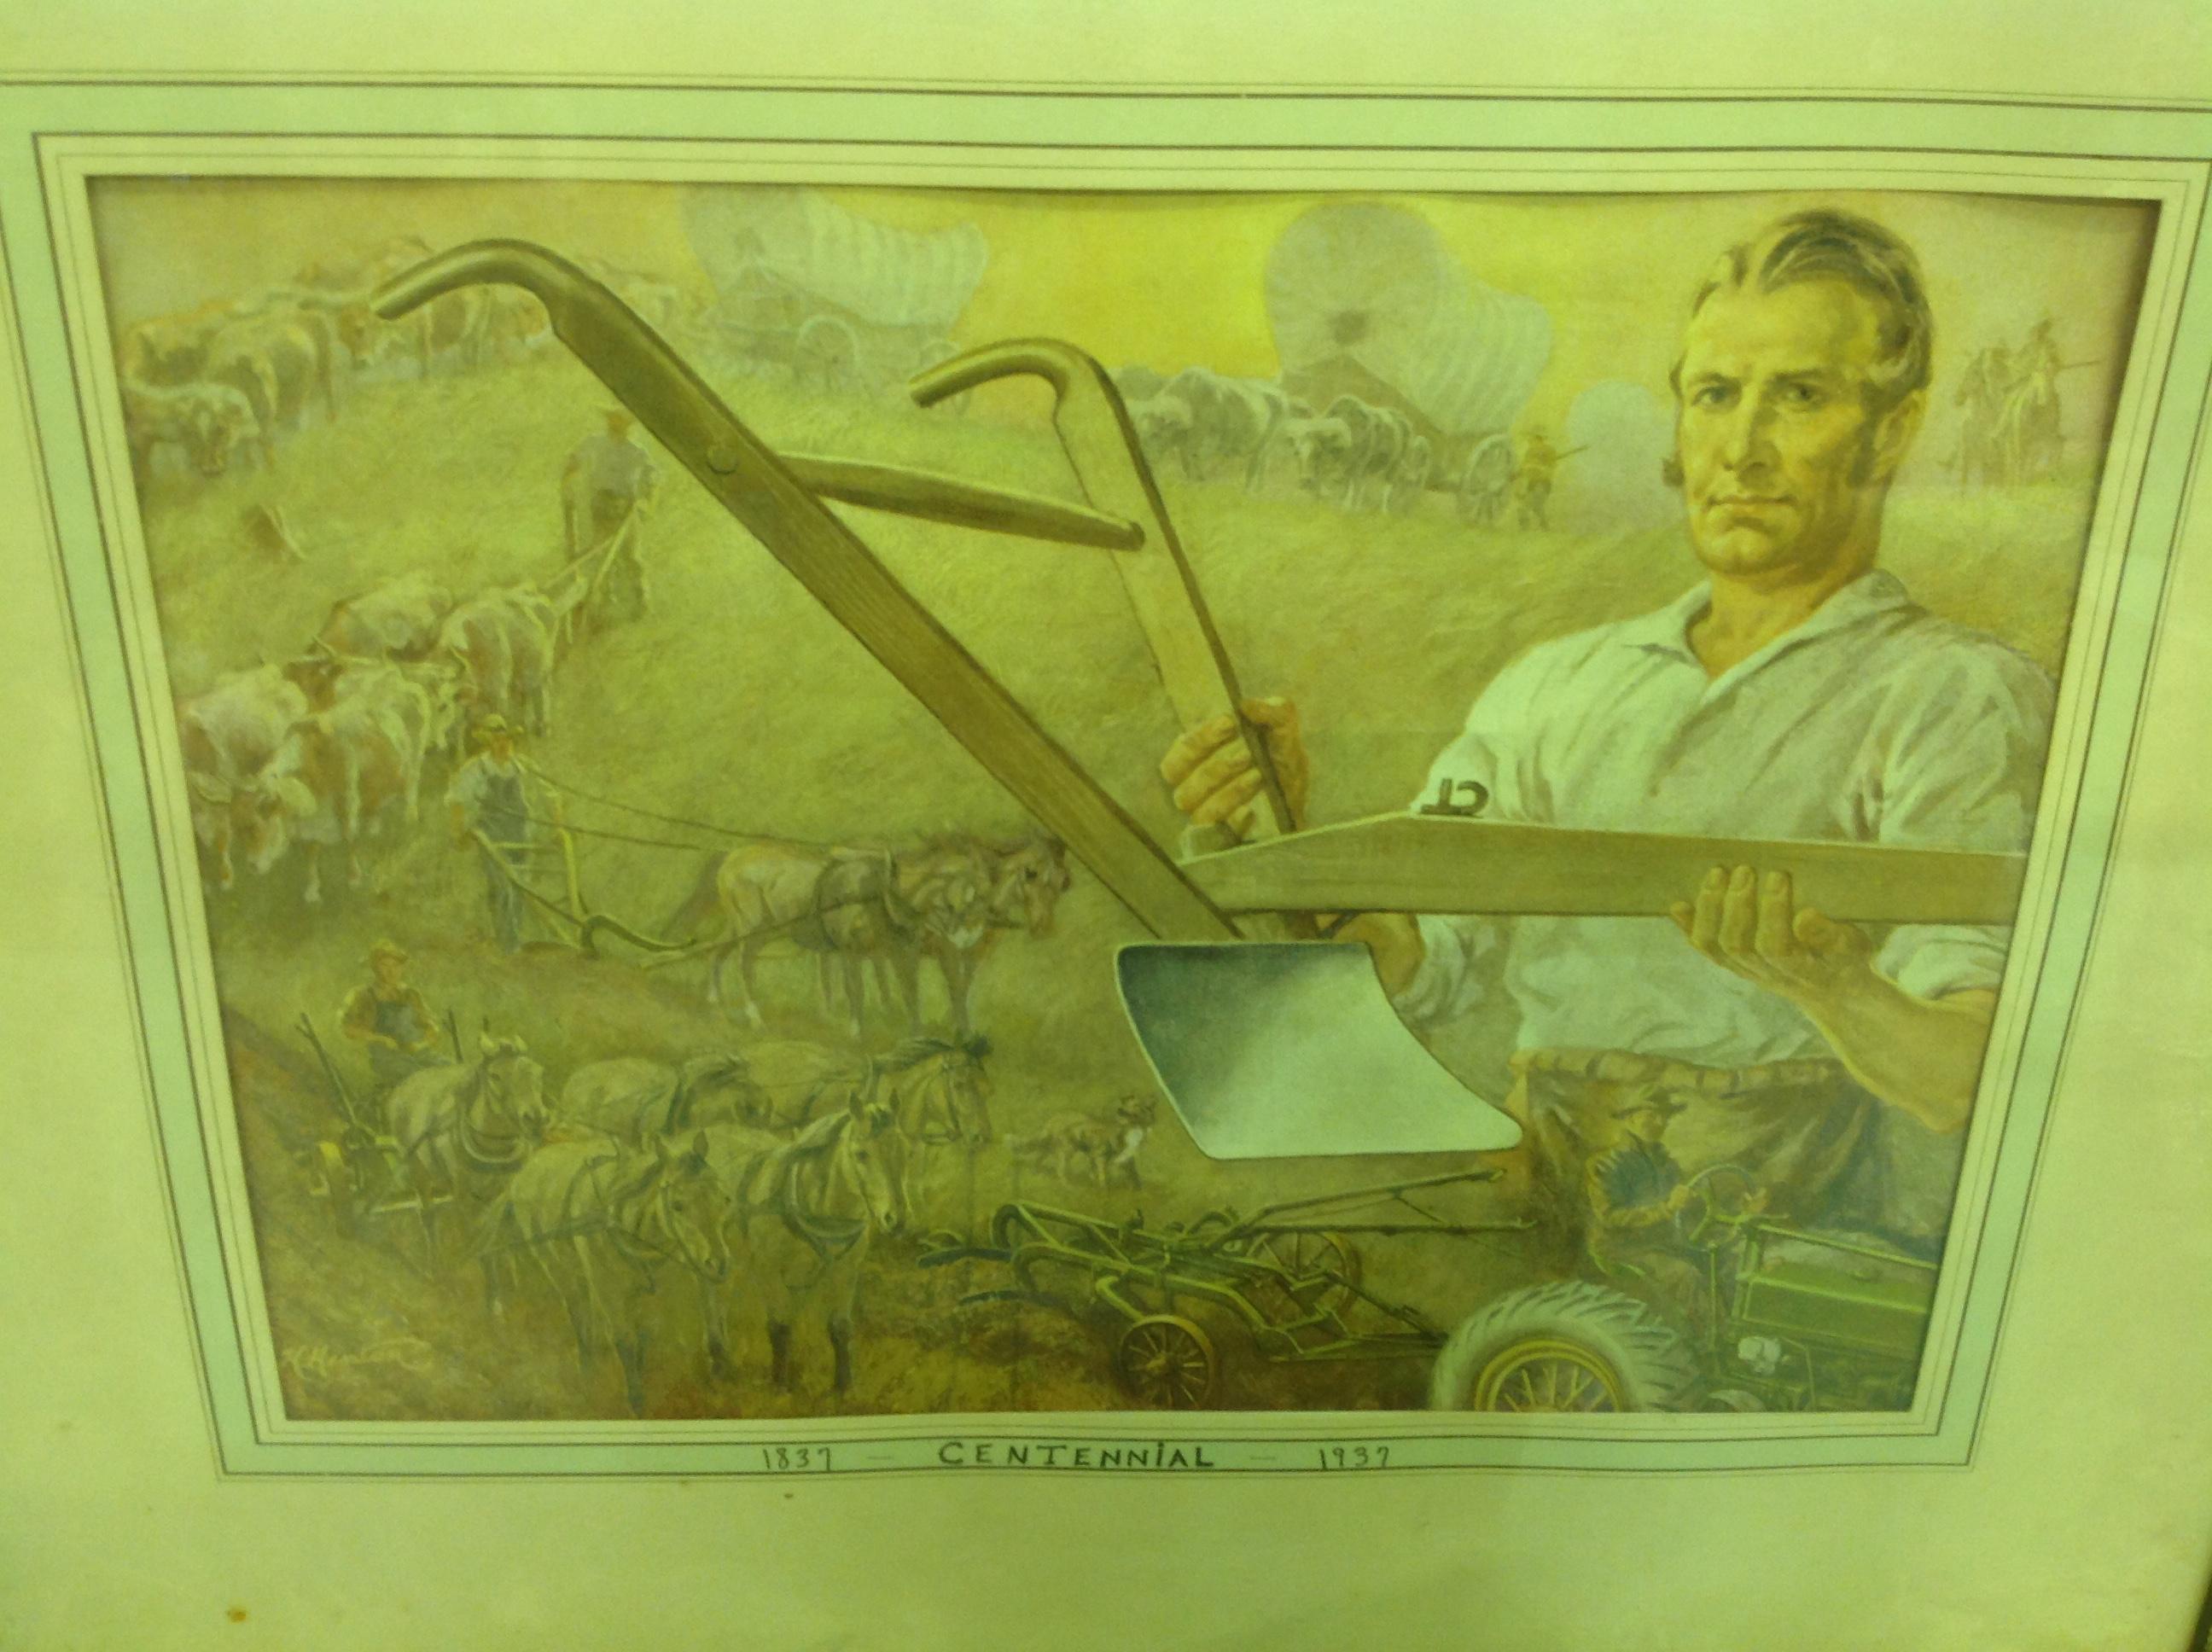 1837-1937 Centennial picture of farmers plowing, w/colored sand art plow la